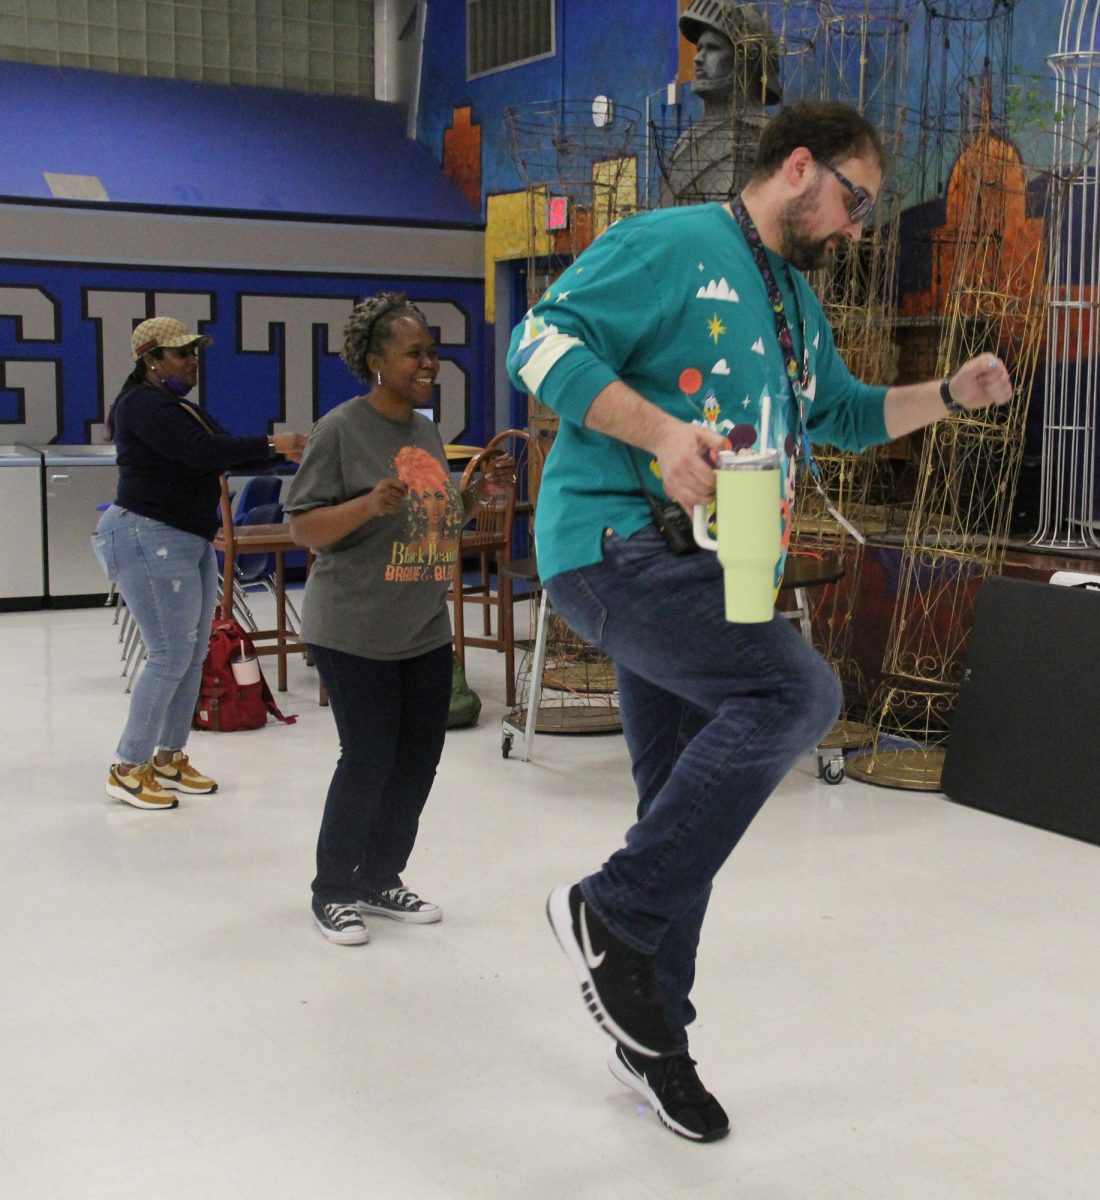 Even with a water bottle in his right hand, a walkie-talkie clipped to his belt, a lanyard around his neck and a winter holiday Disney sweater on, Fine Arts director Dr. Samuel Parrott is still able to bust a respectable move as SCORES teacher Helaine Brockington and Fine Arts Academy assistant Tonya Moore line dance alongside him.